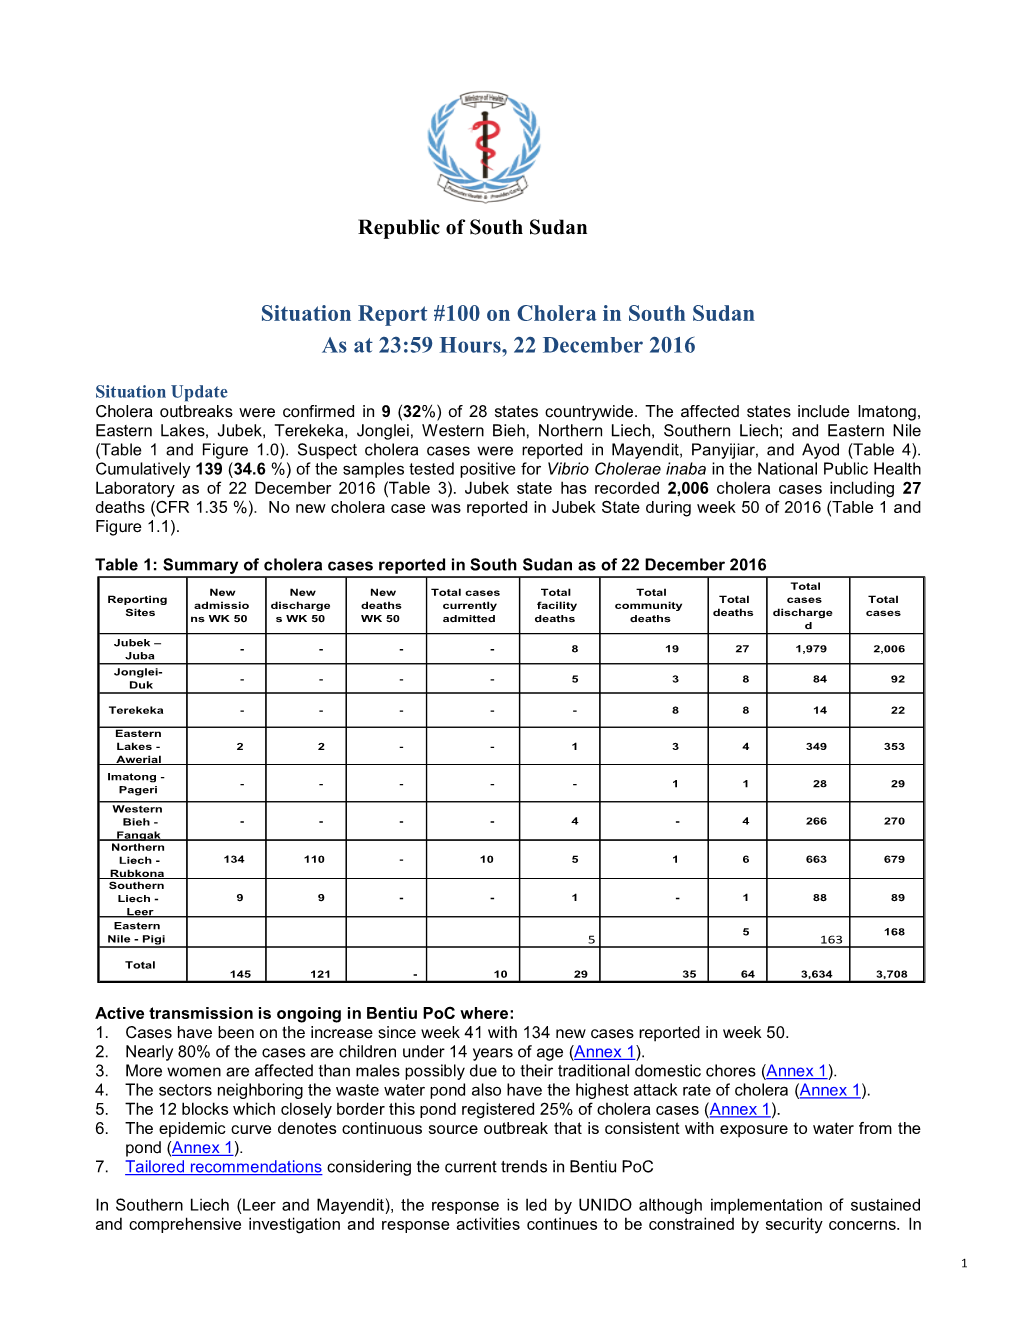 Situation Report #100 on Cholera in South Sudan As at 23:59 Hours, 22 December 2016